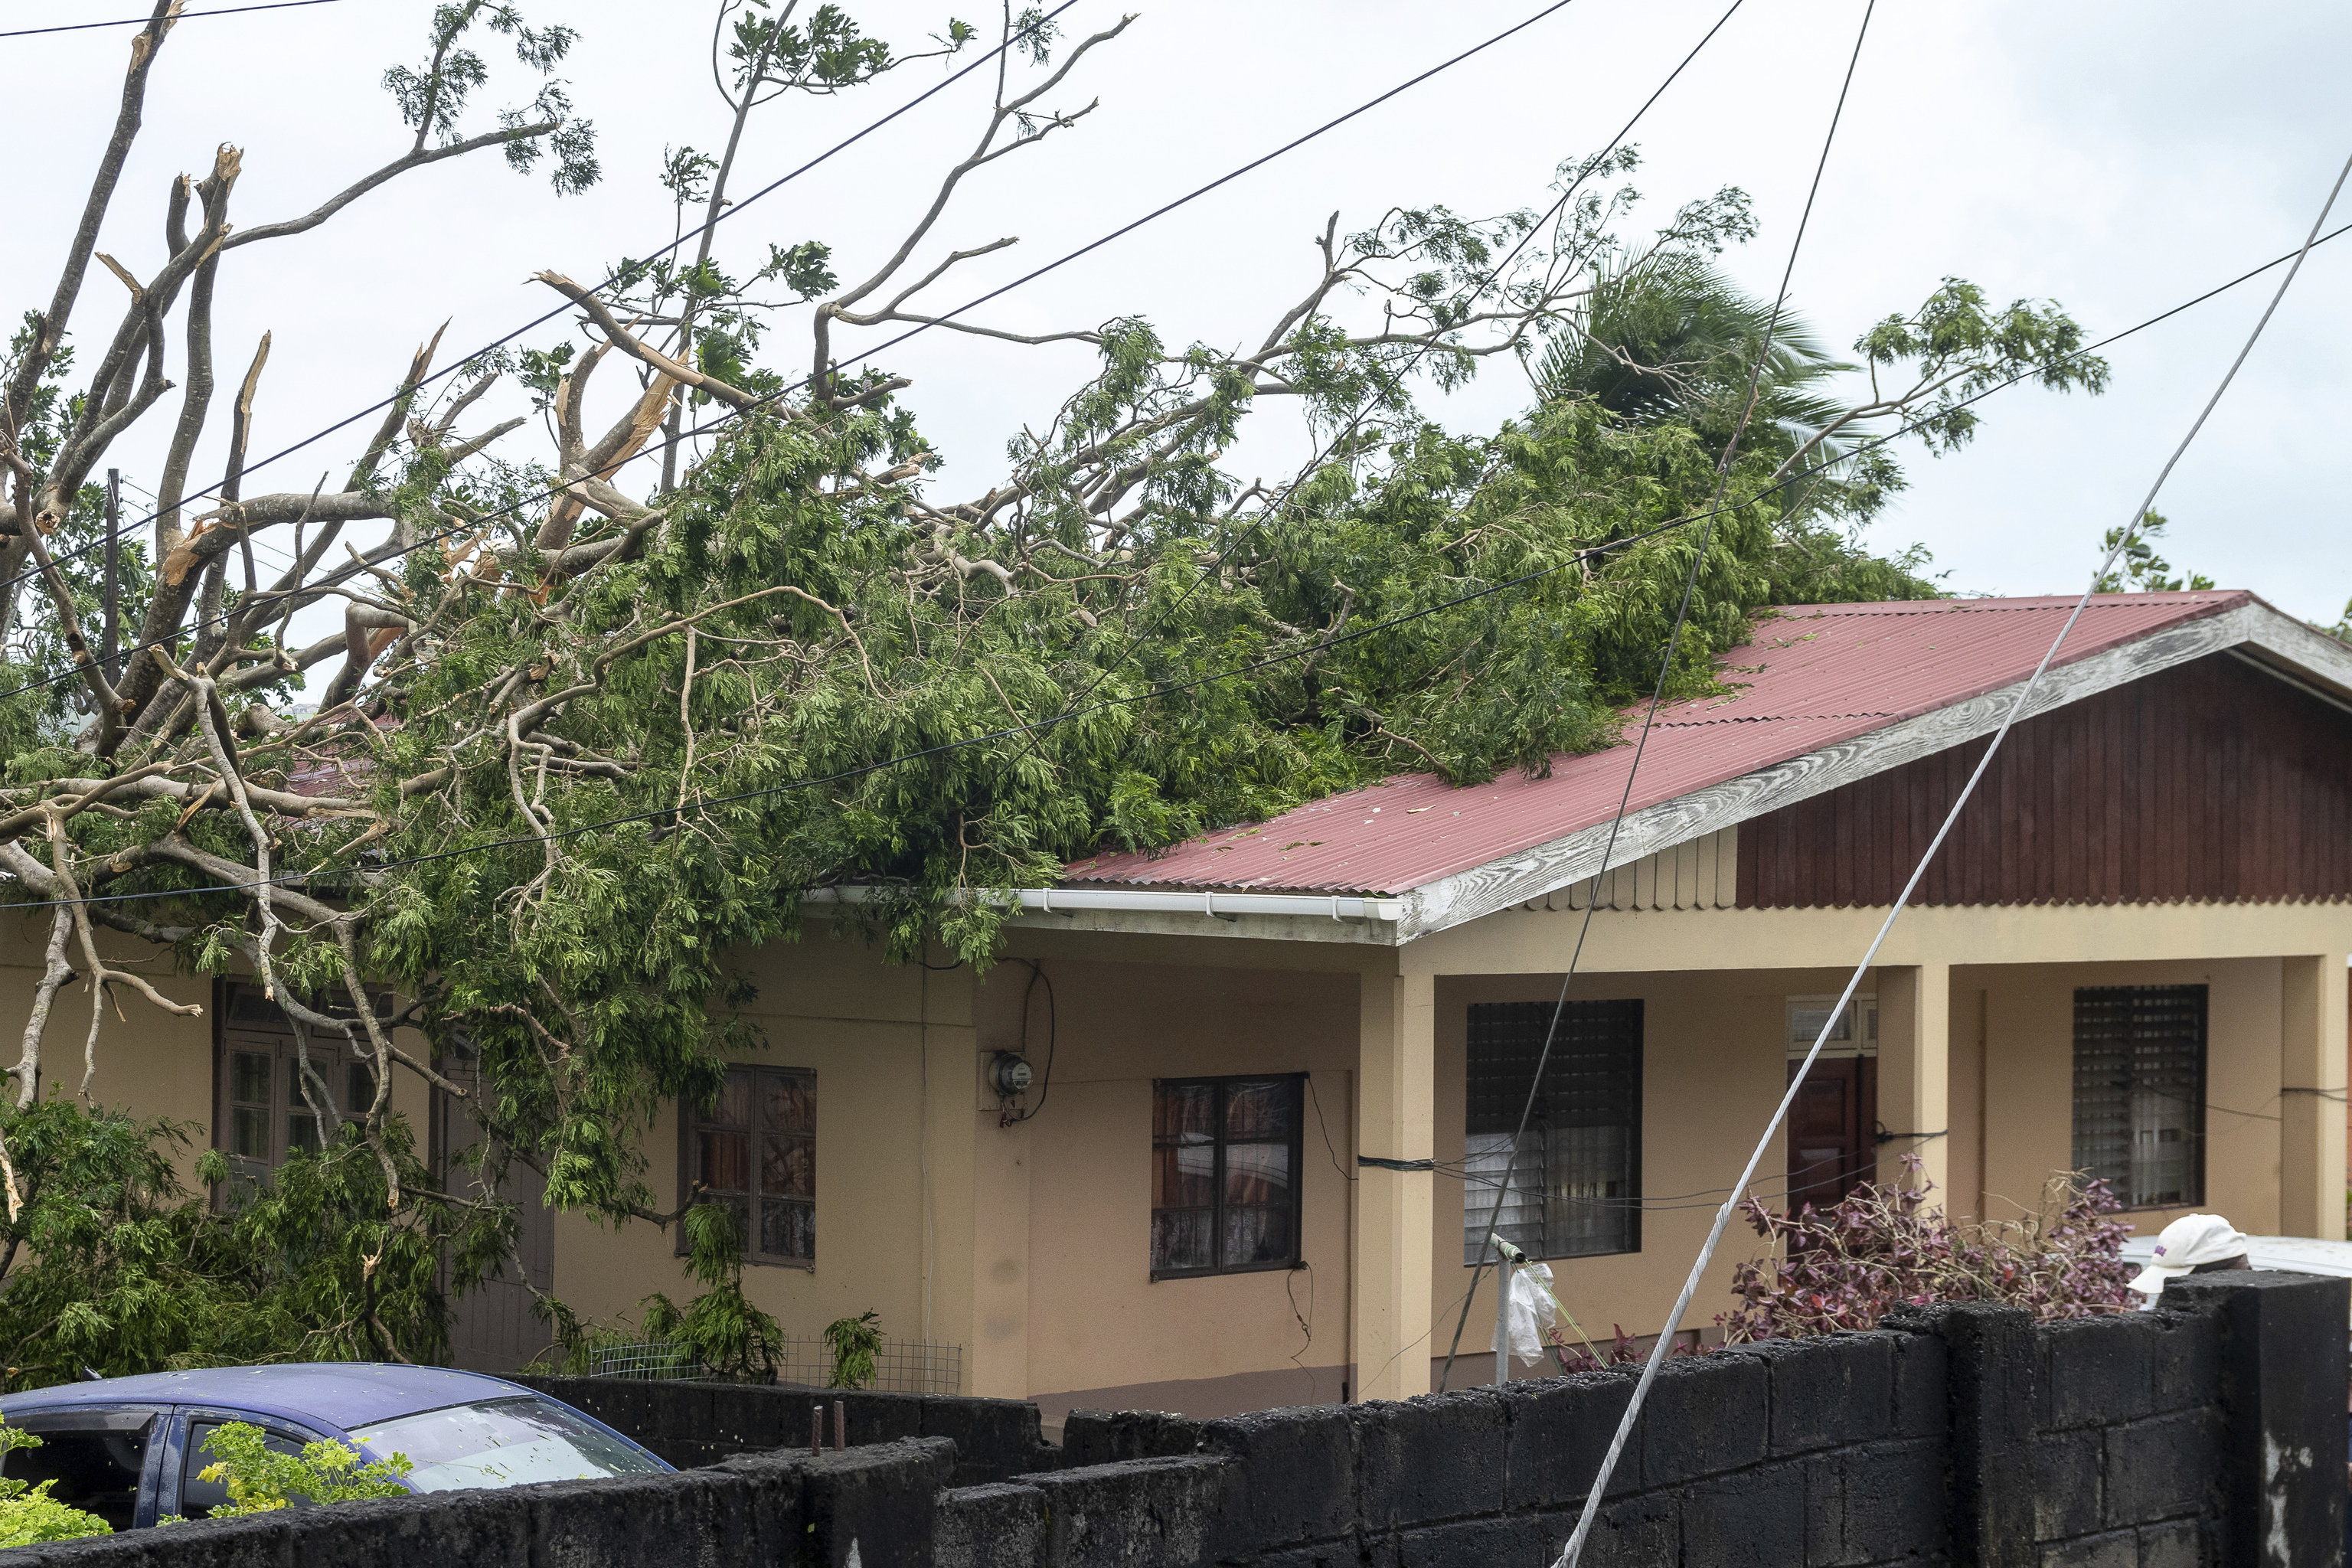 A tree lies on the roof of a house in Kingstown, St. Vincent and the Grenadines, after Hurricane Beryl.